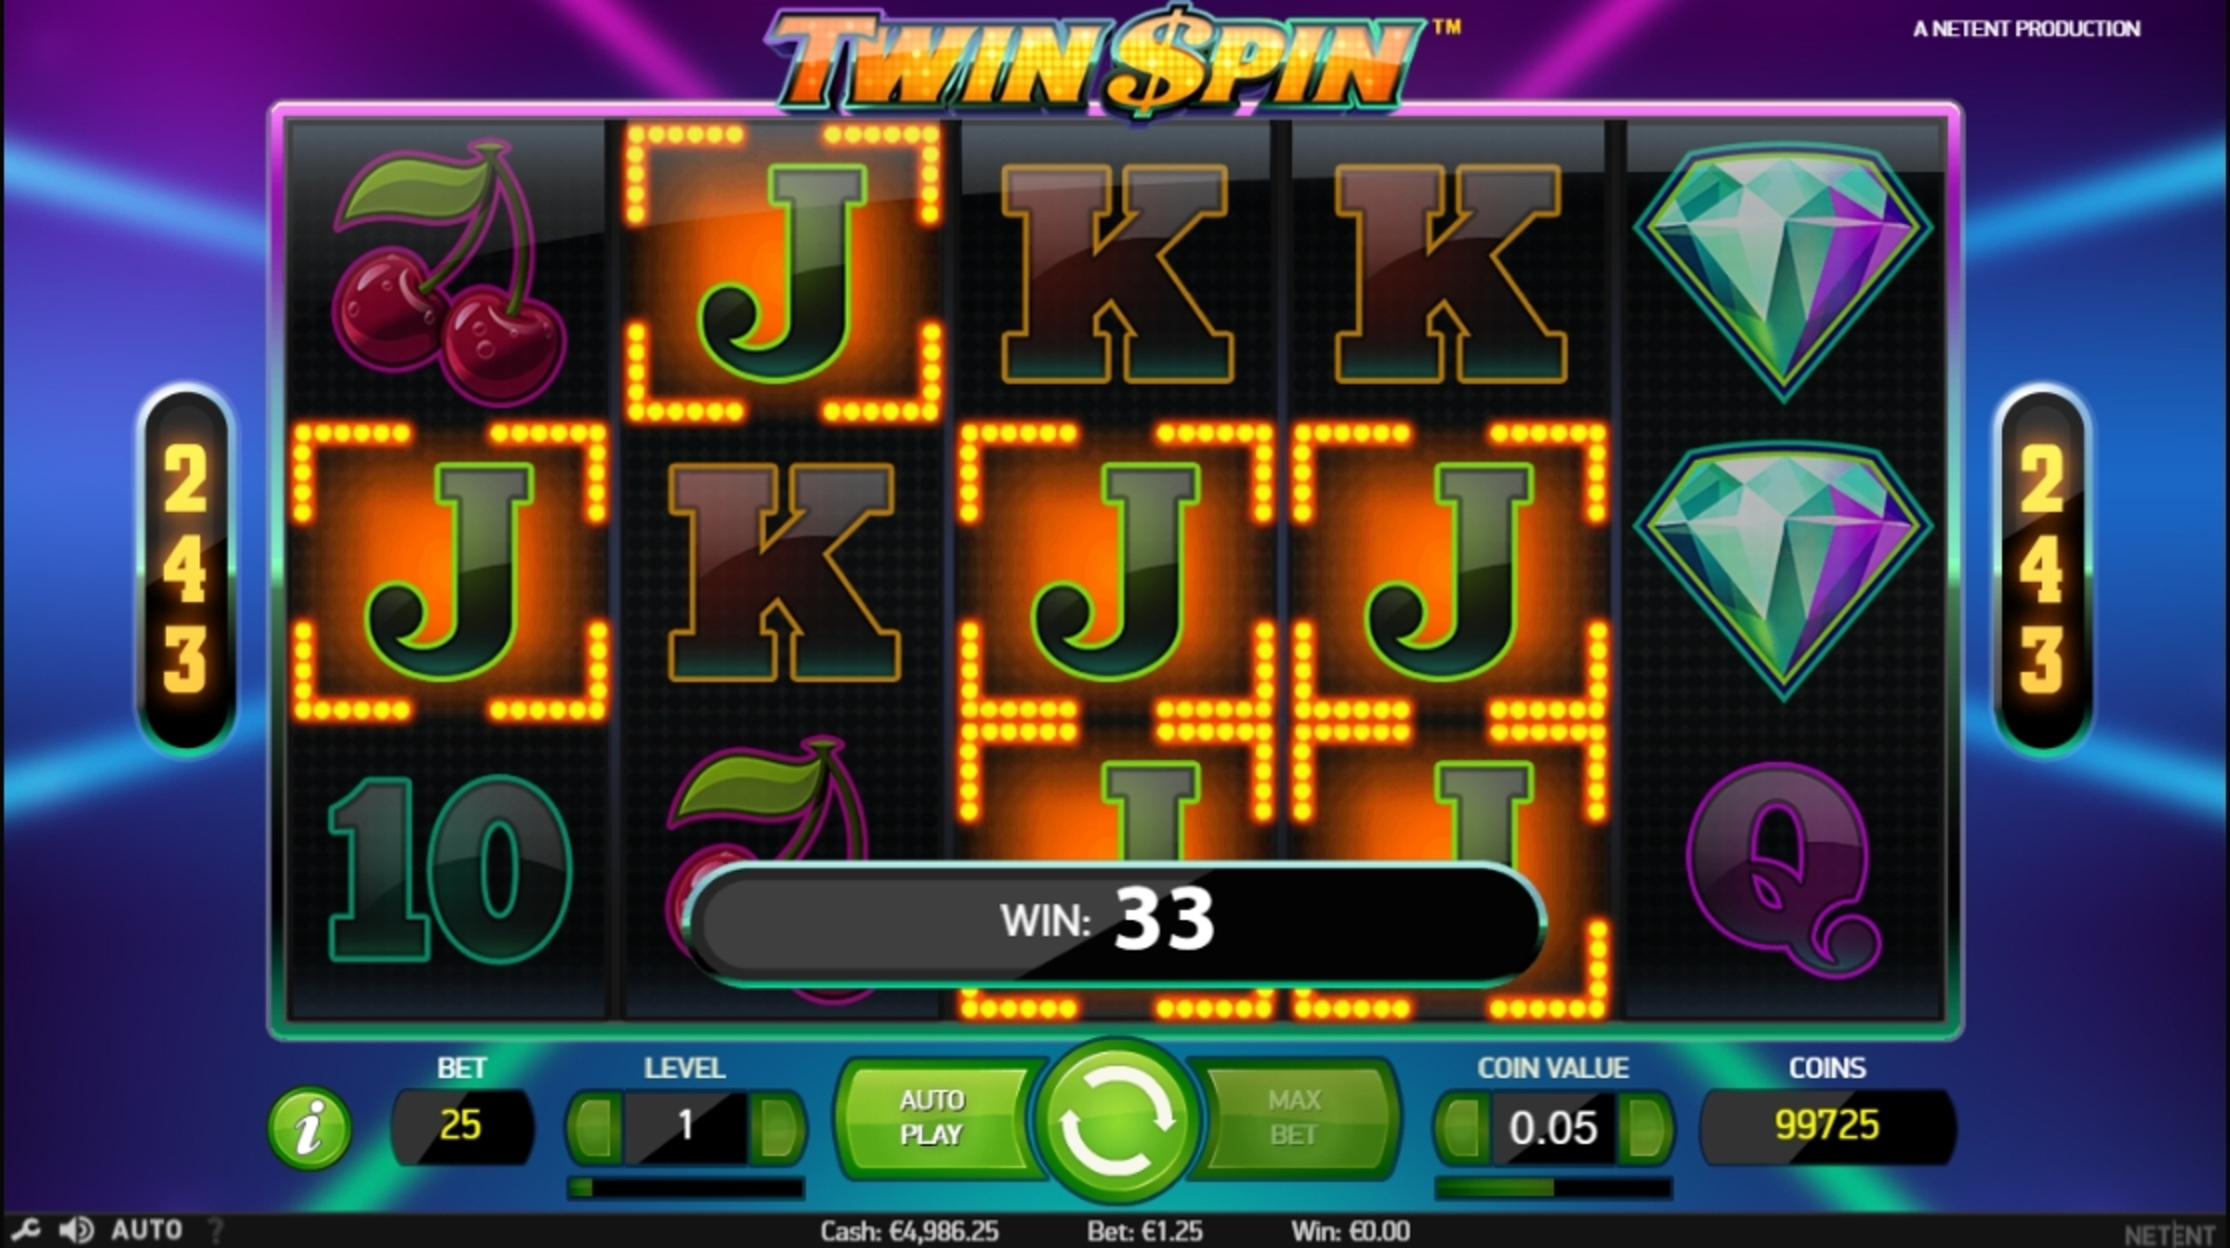 Win Money in Twin Spin Free Slot Game by NetEnt